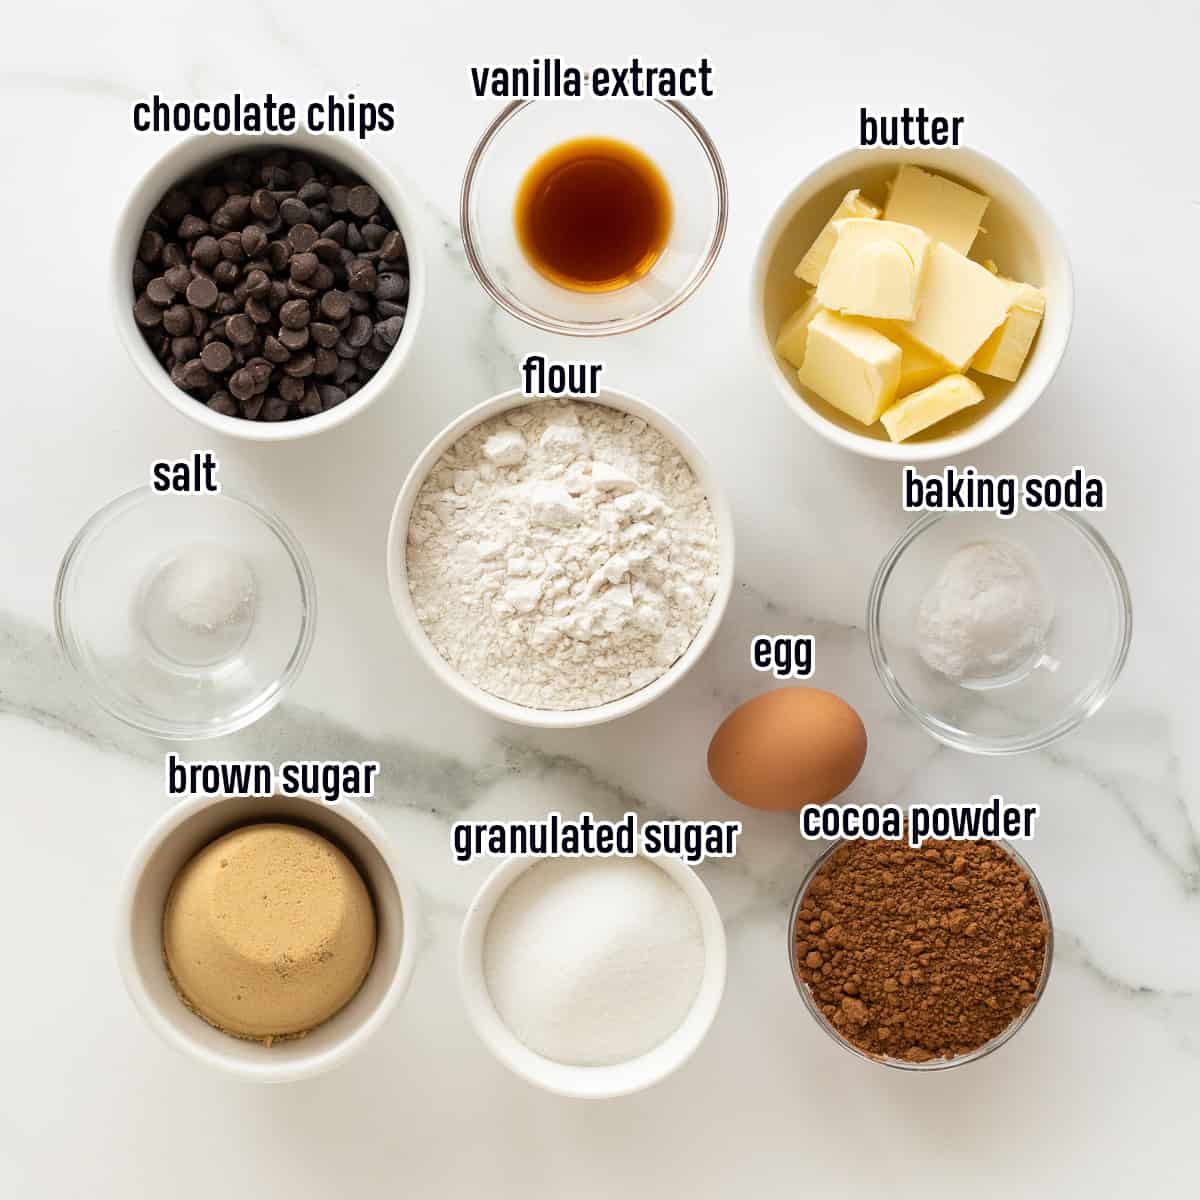 Chocolate chips, cocoa powder, flour, sugar and other ingredients in bowls with text.